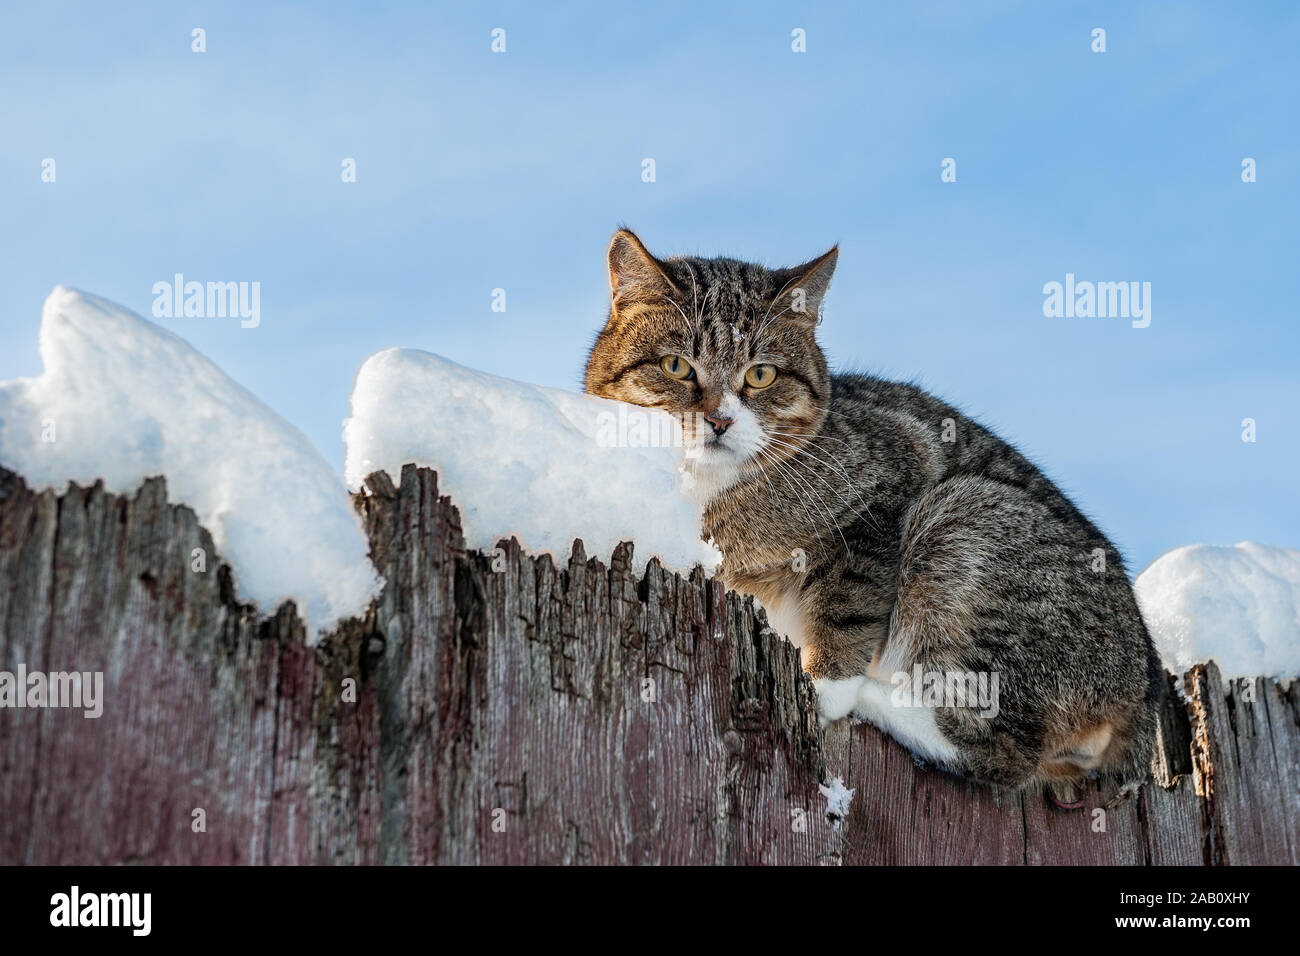 Hungry beautiful grey cat sitting on snow covered fence in winter. Stray cats cold in the winter. Copy space. Stock Photo